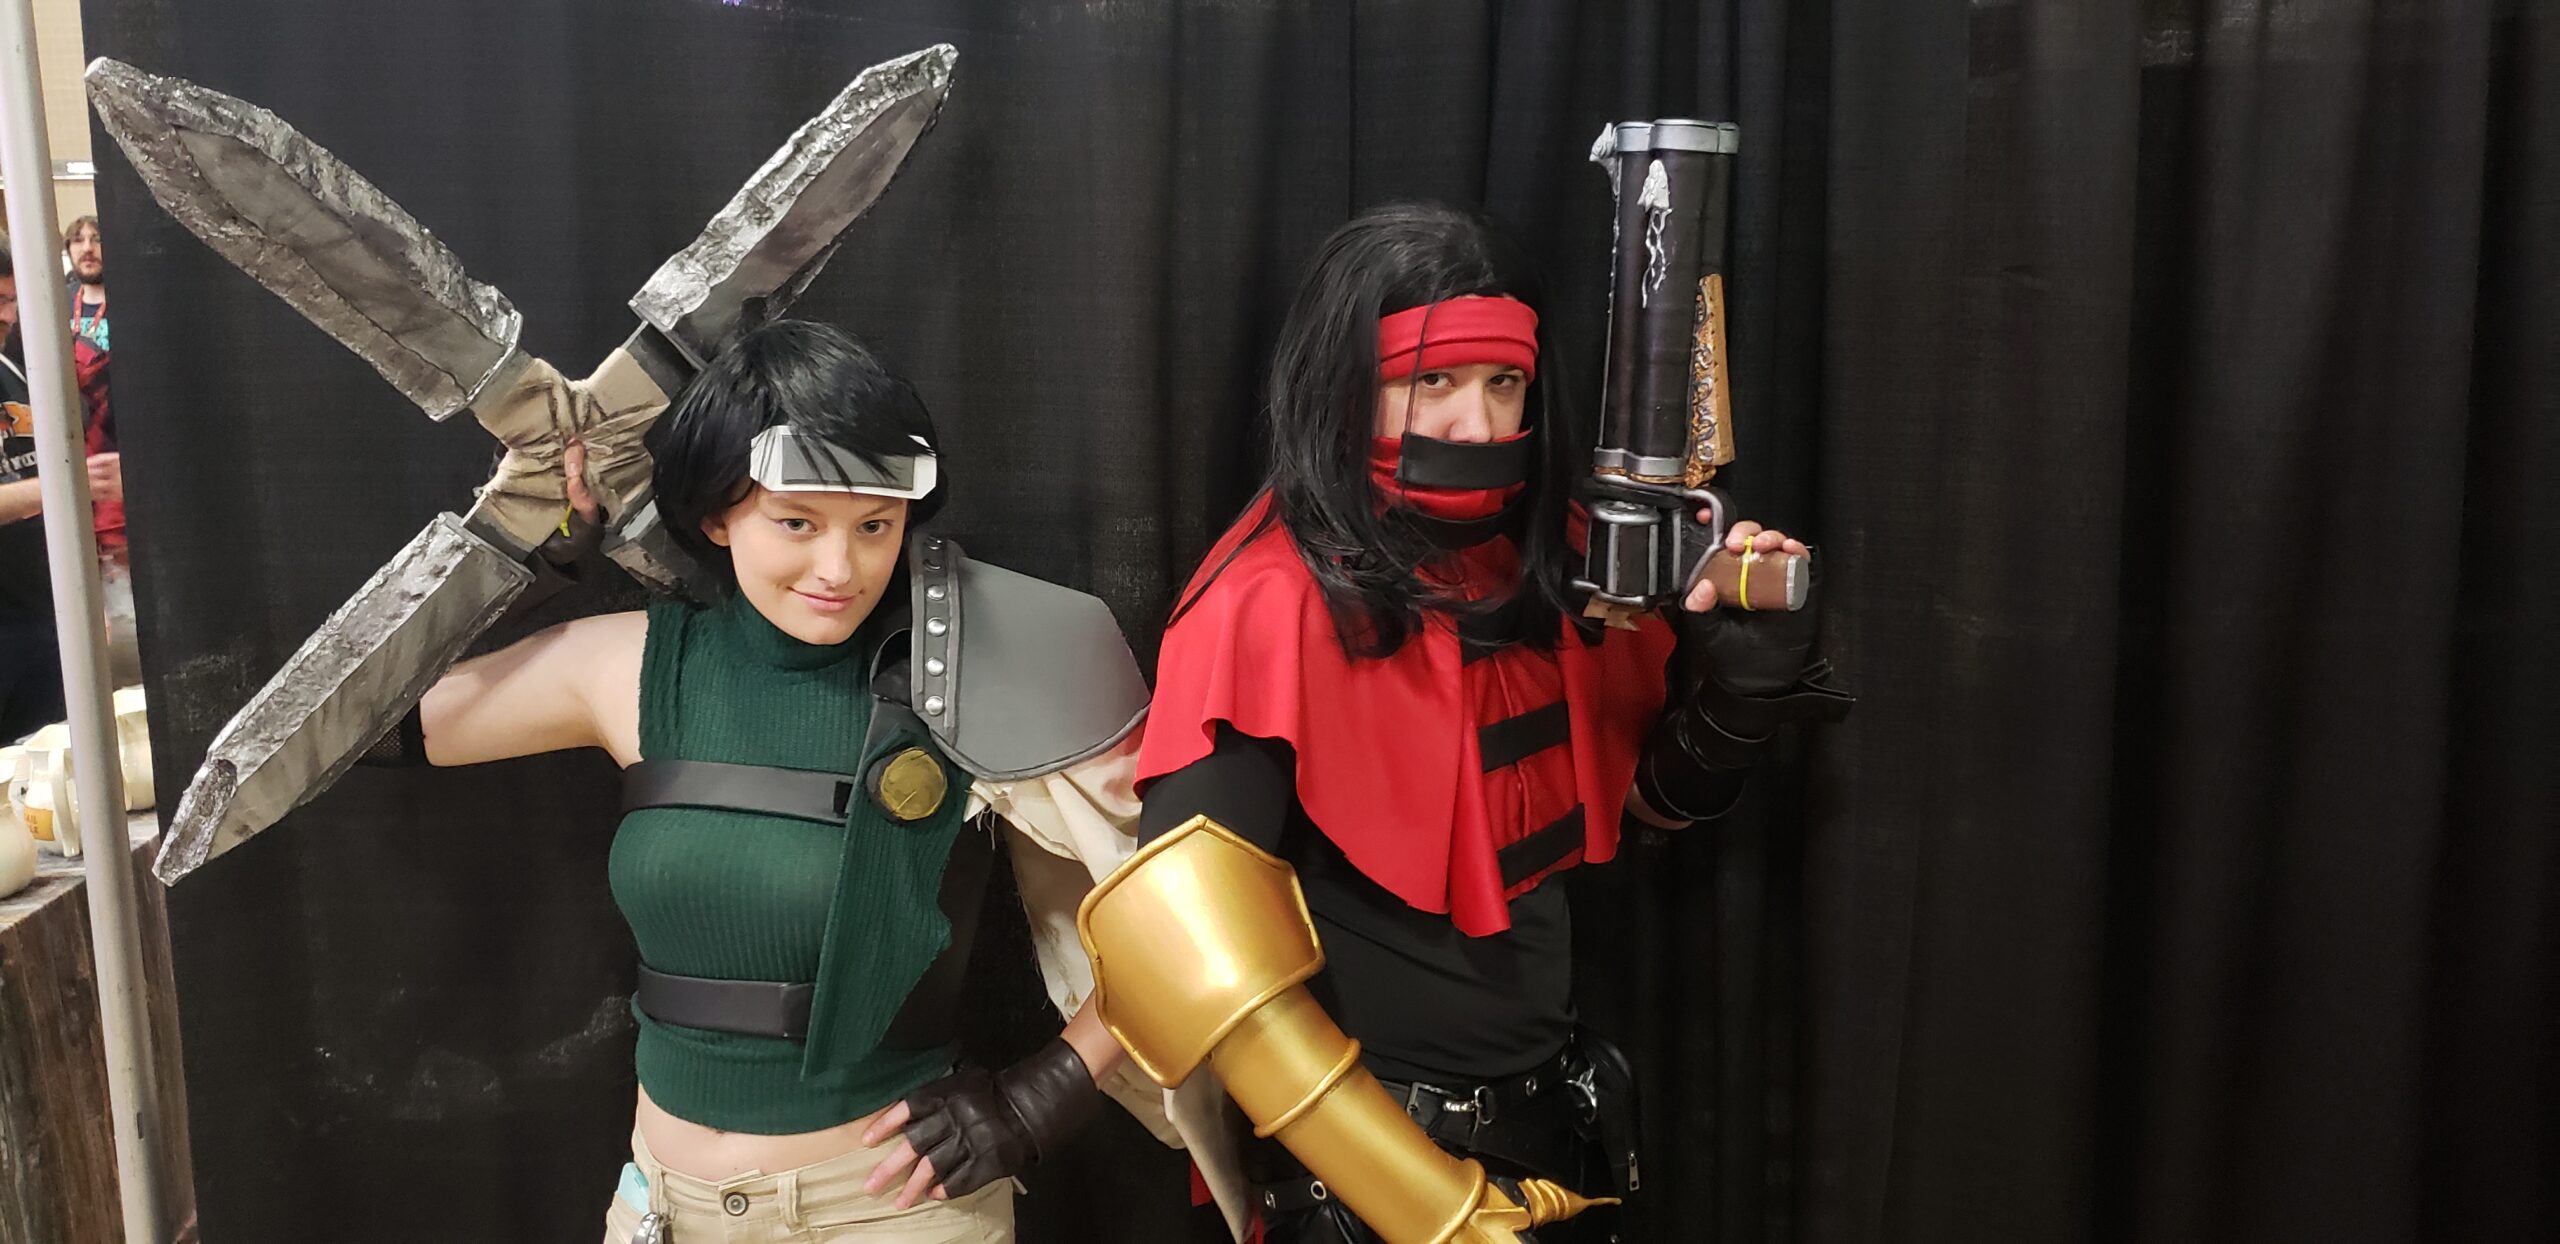 Vincent and Yuffie Cosplay